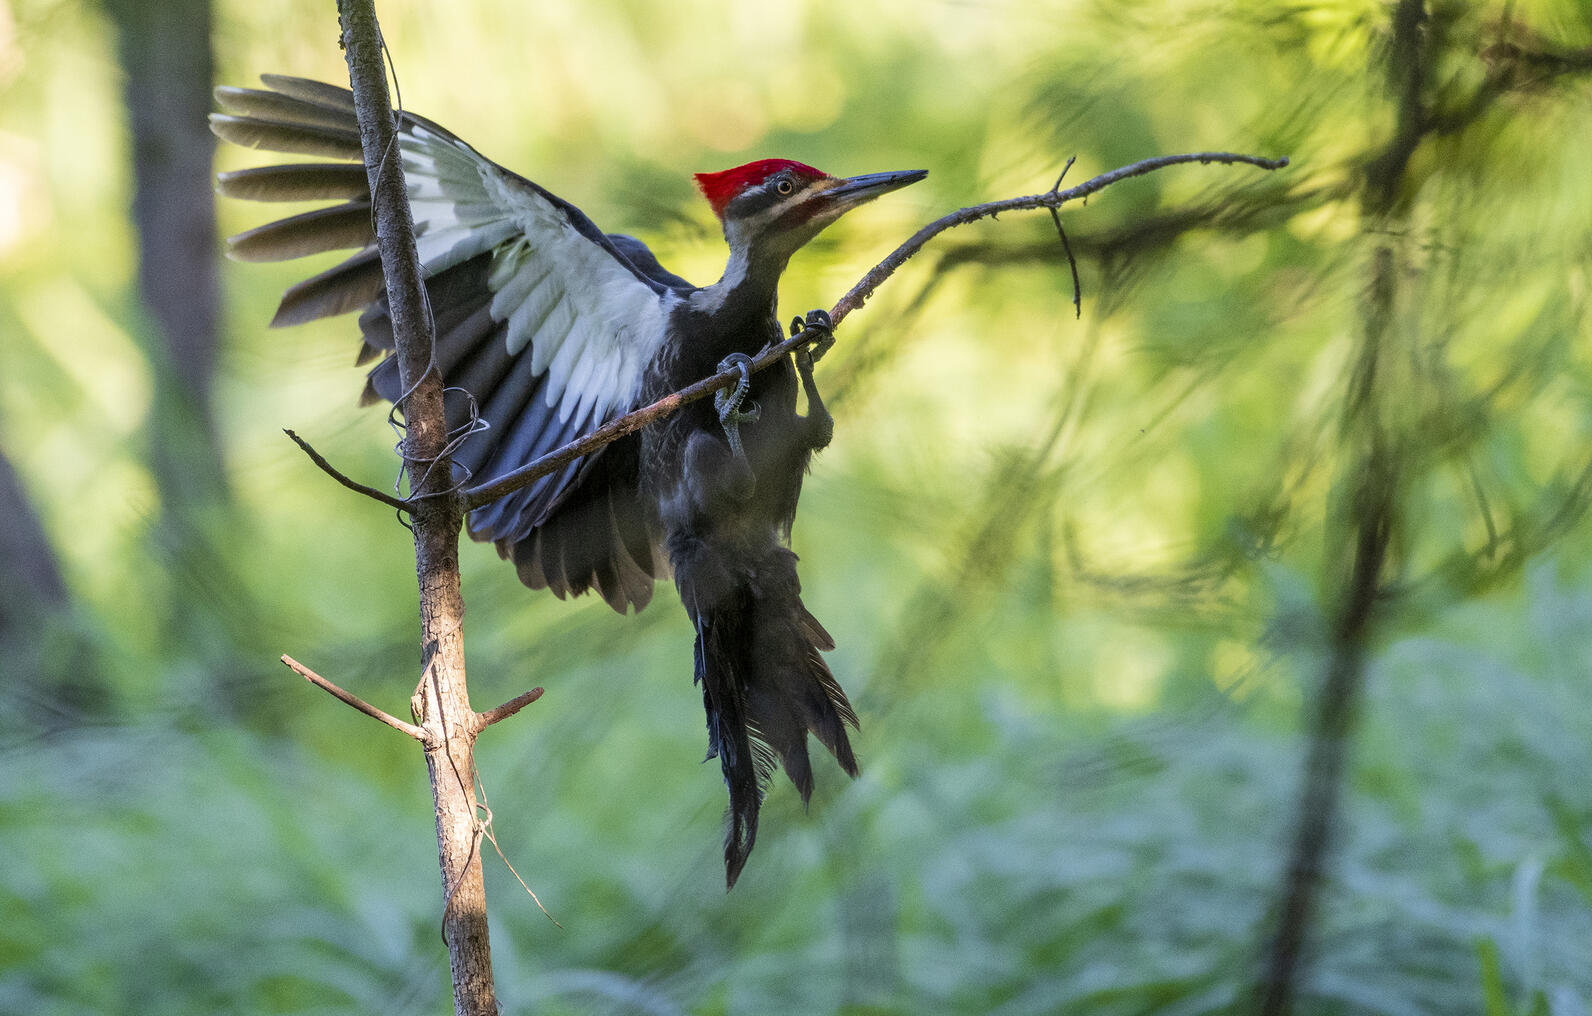 A Pileated Woodpecker flying against a green background.